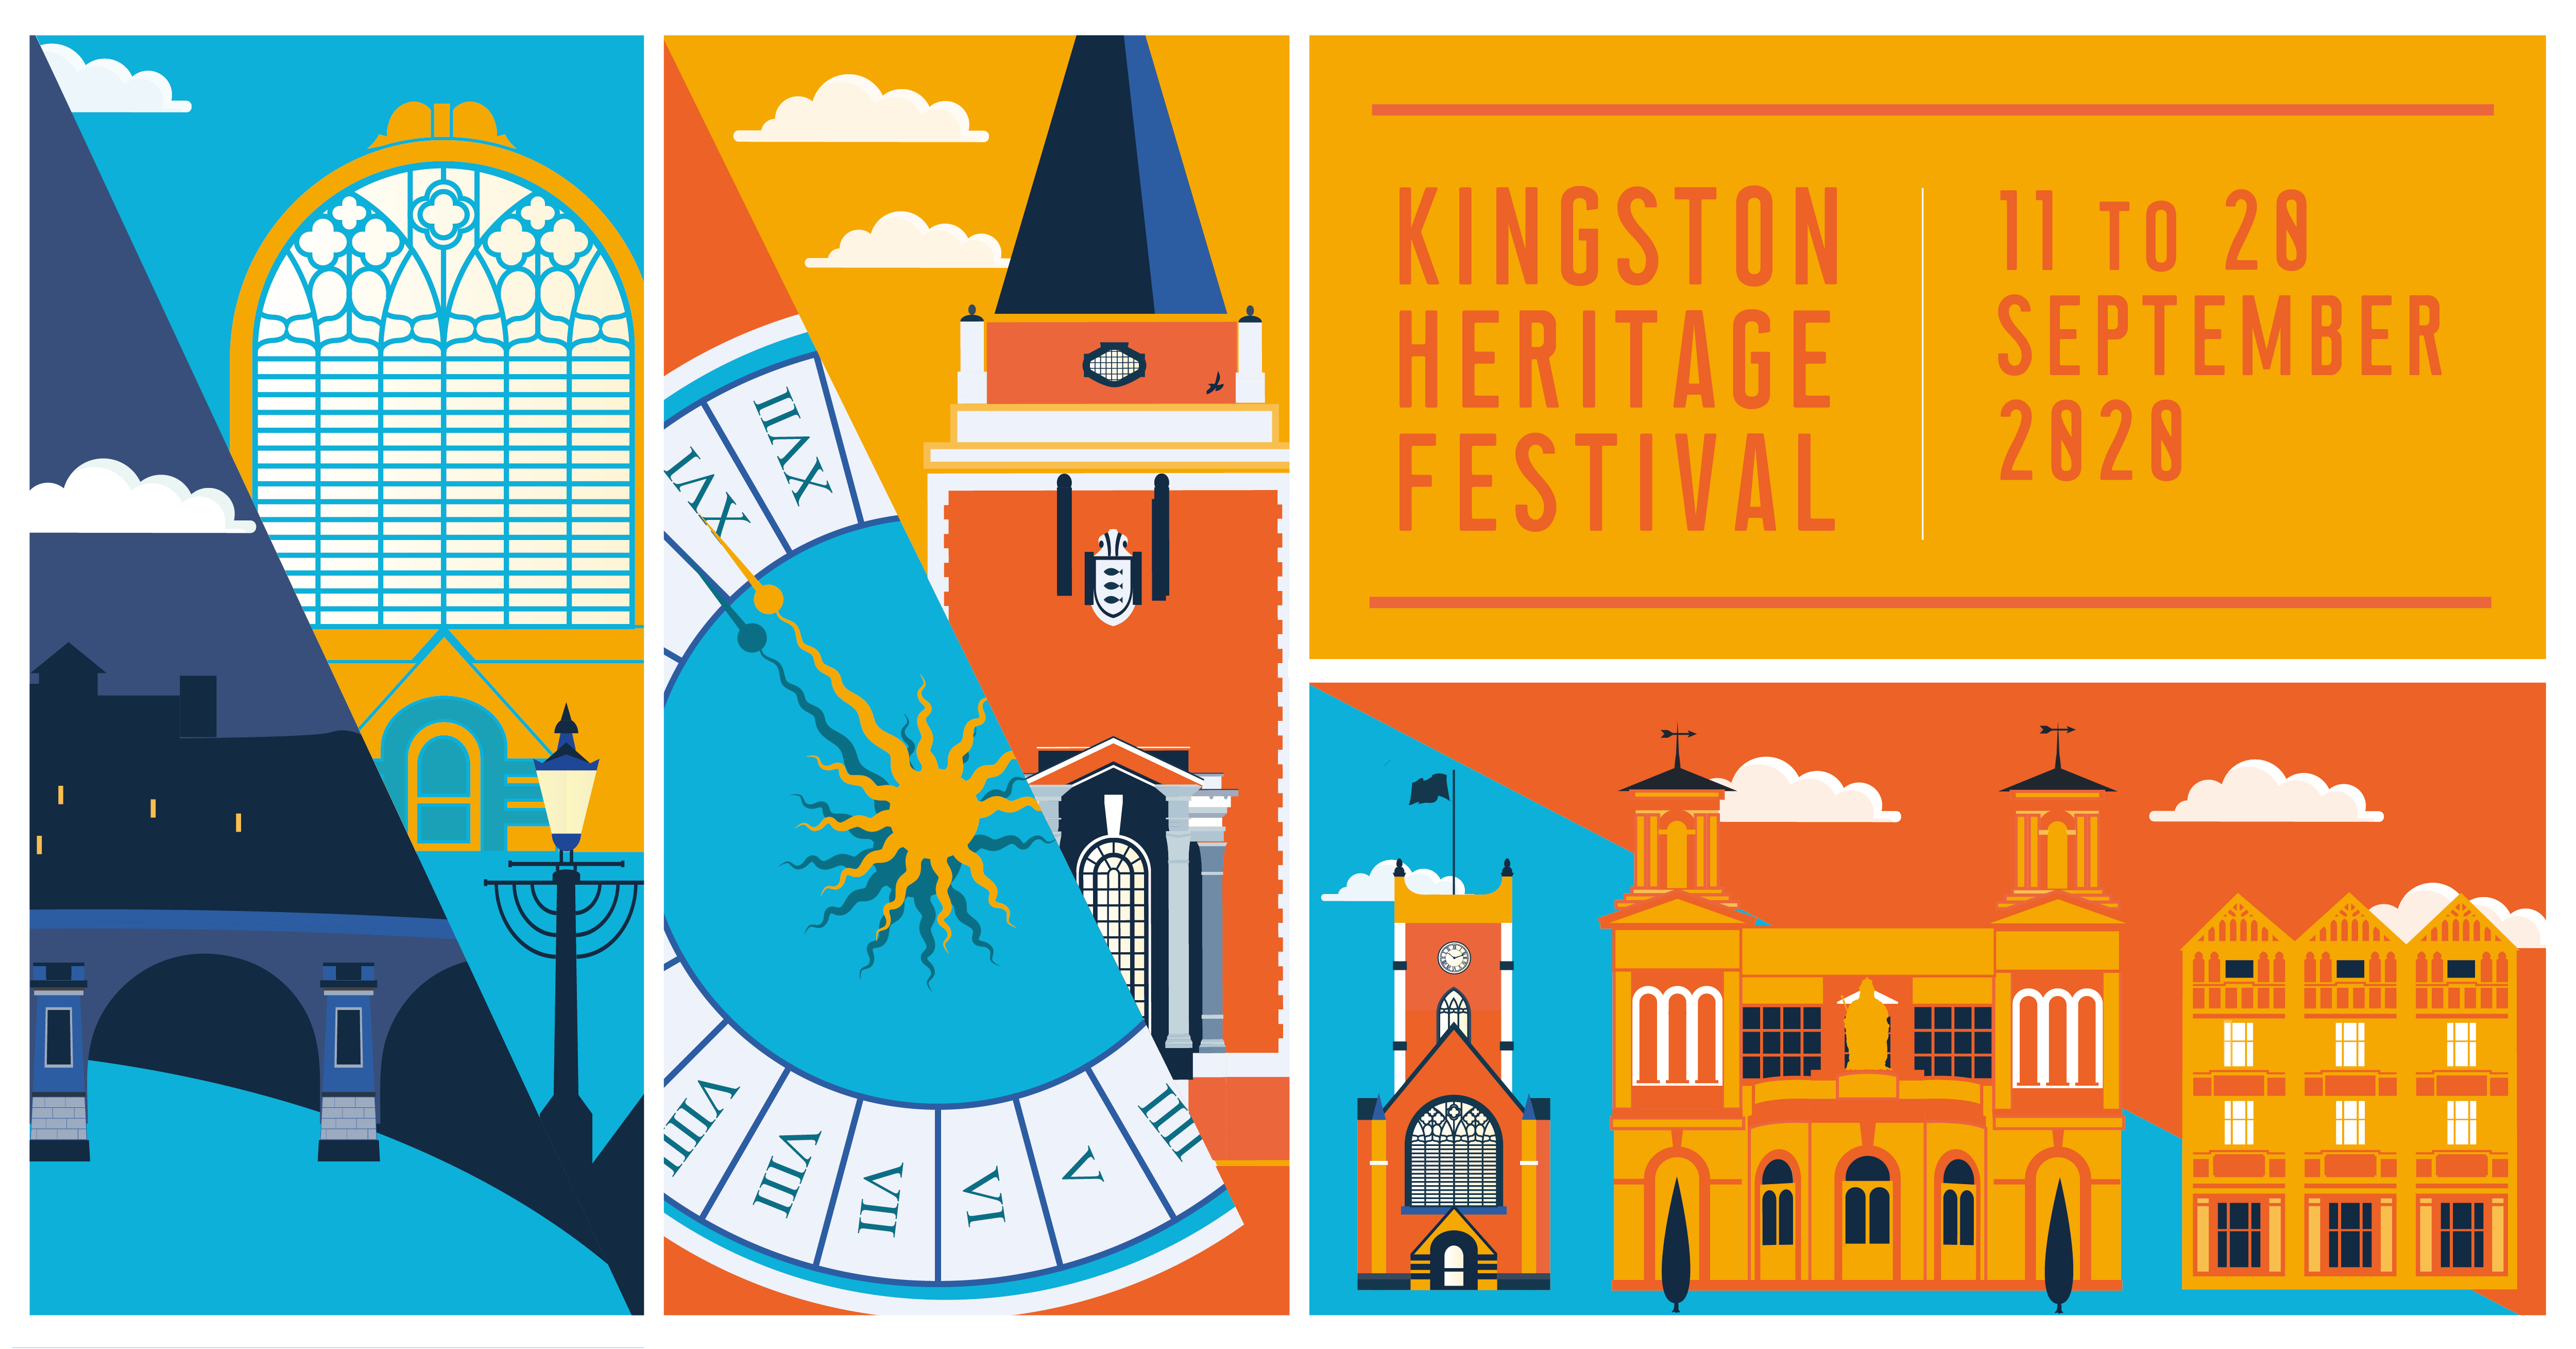 Simplistic drawings in bright colours of famous buildings from the borough including the guildhall, Kingston bridge and market place